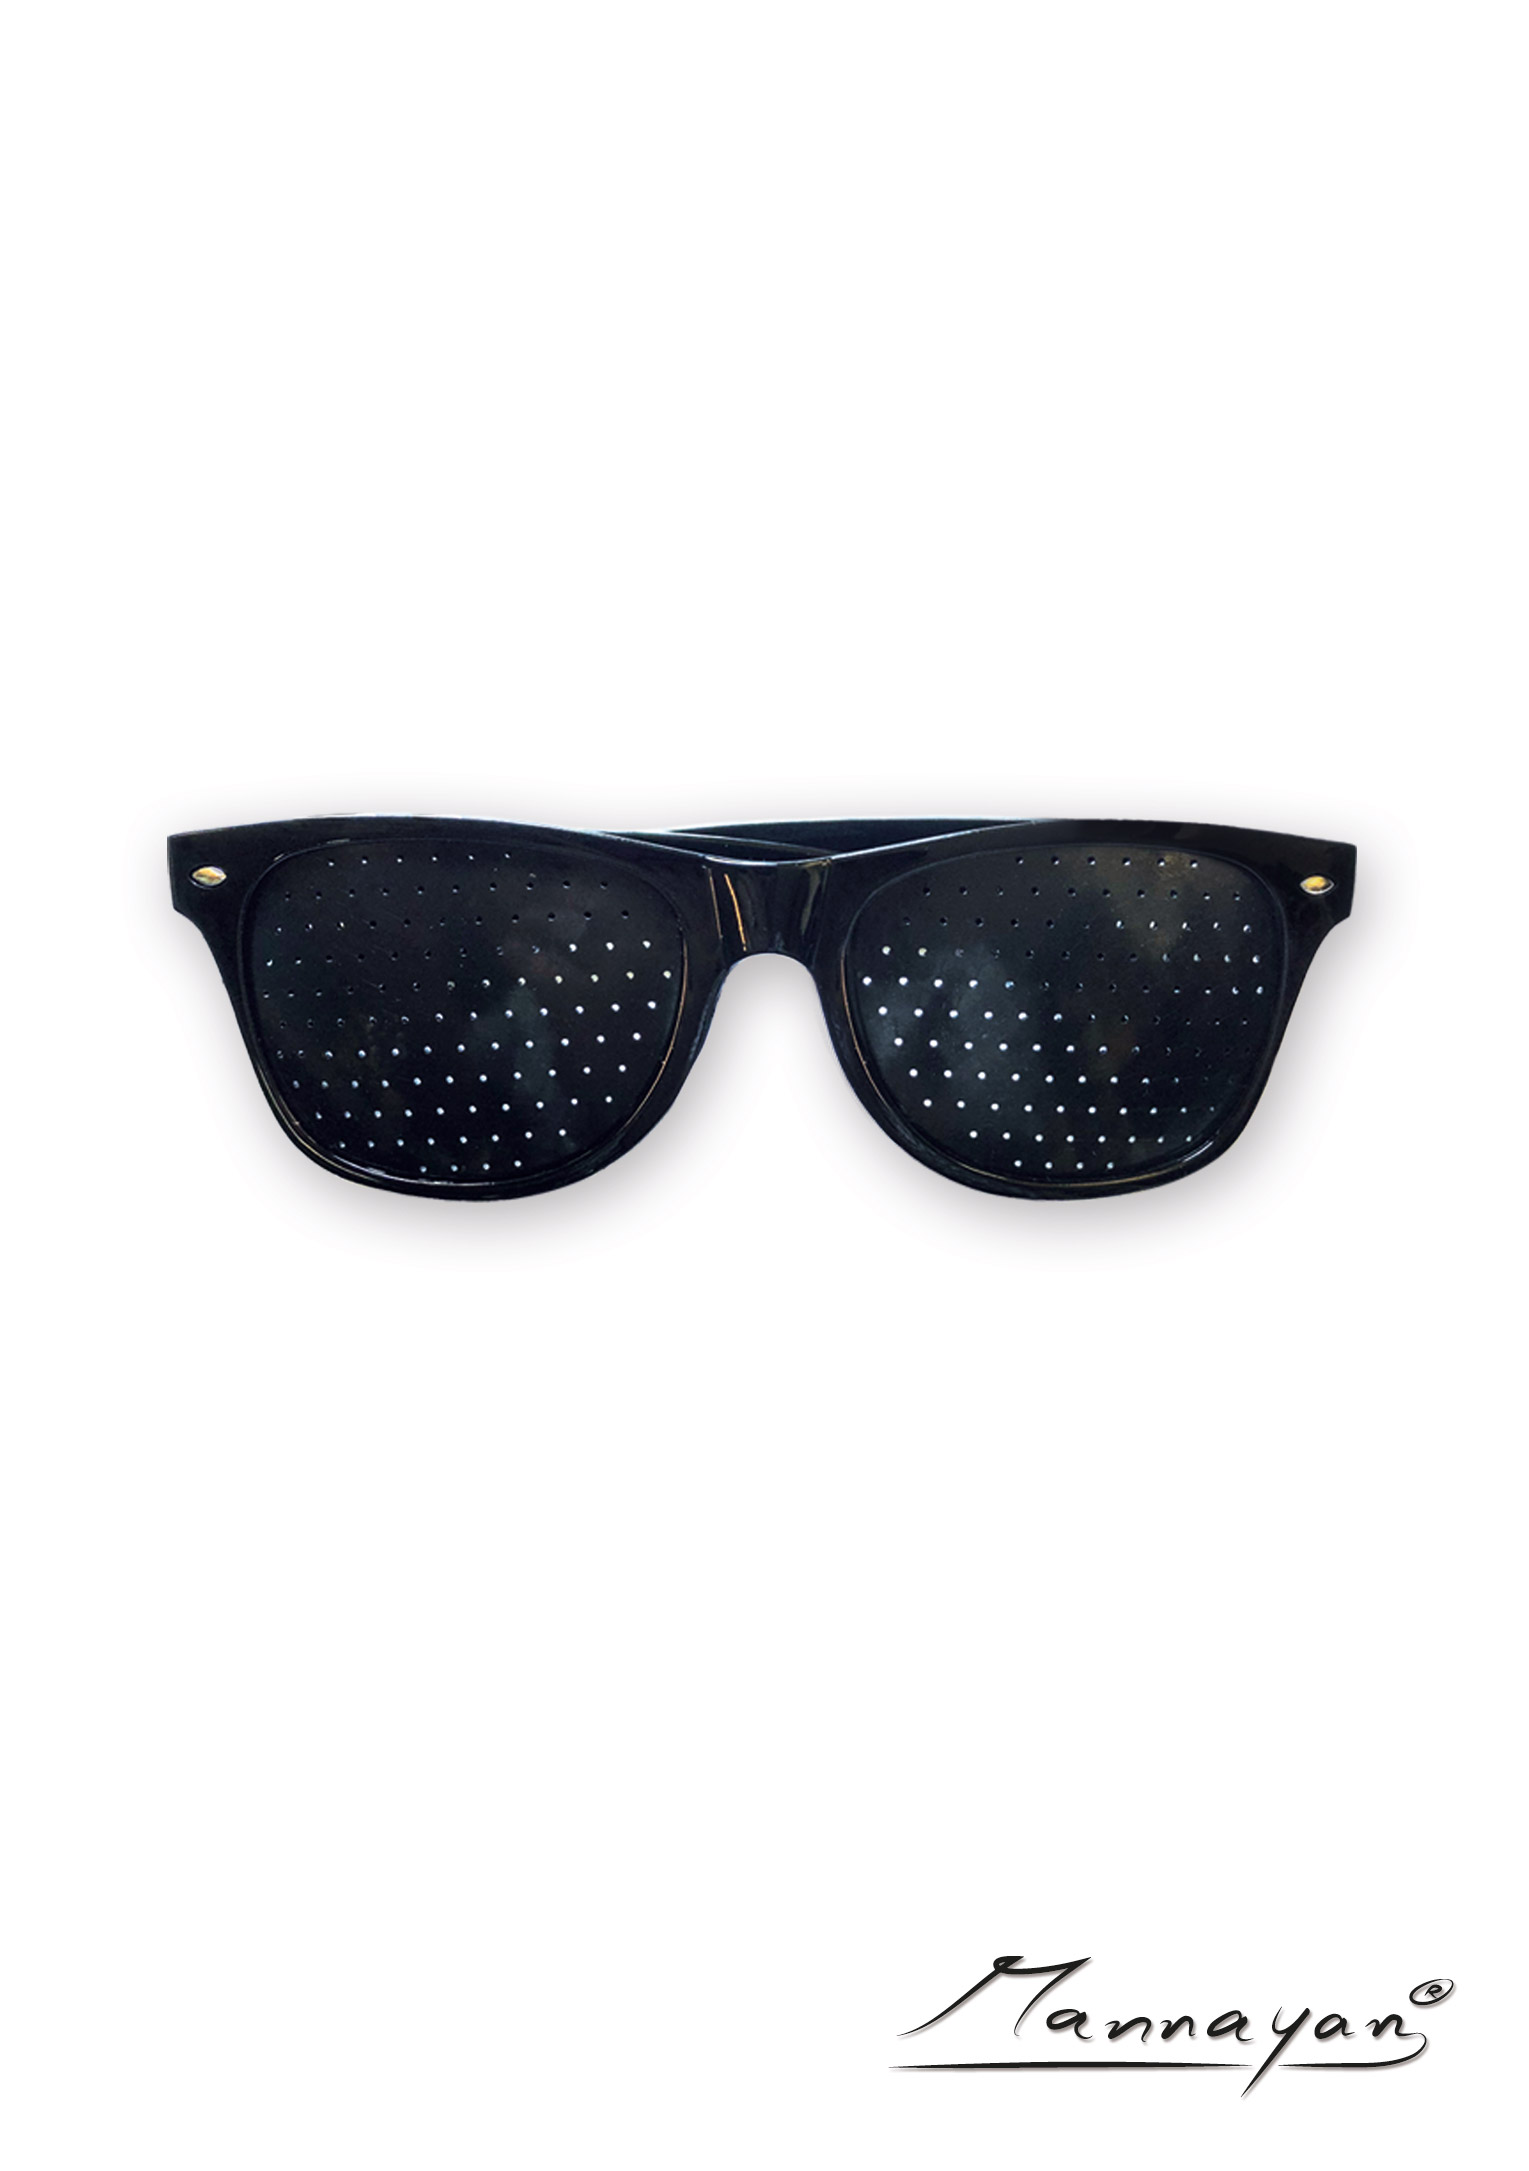 Bundle Chipcard SEH + Mannayan Mannasicht+ + Perforated grid glasses - Temporarily unavailable